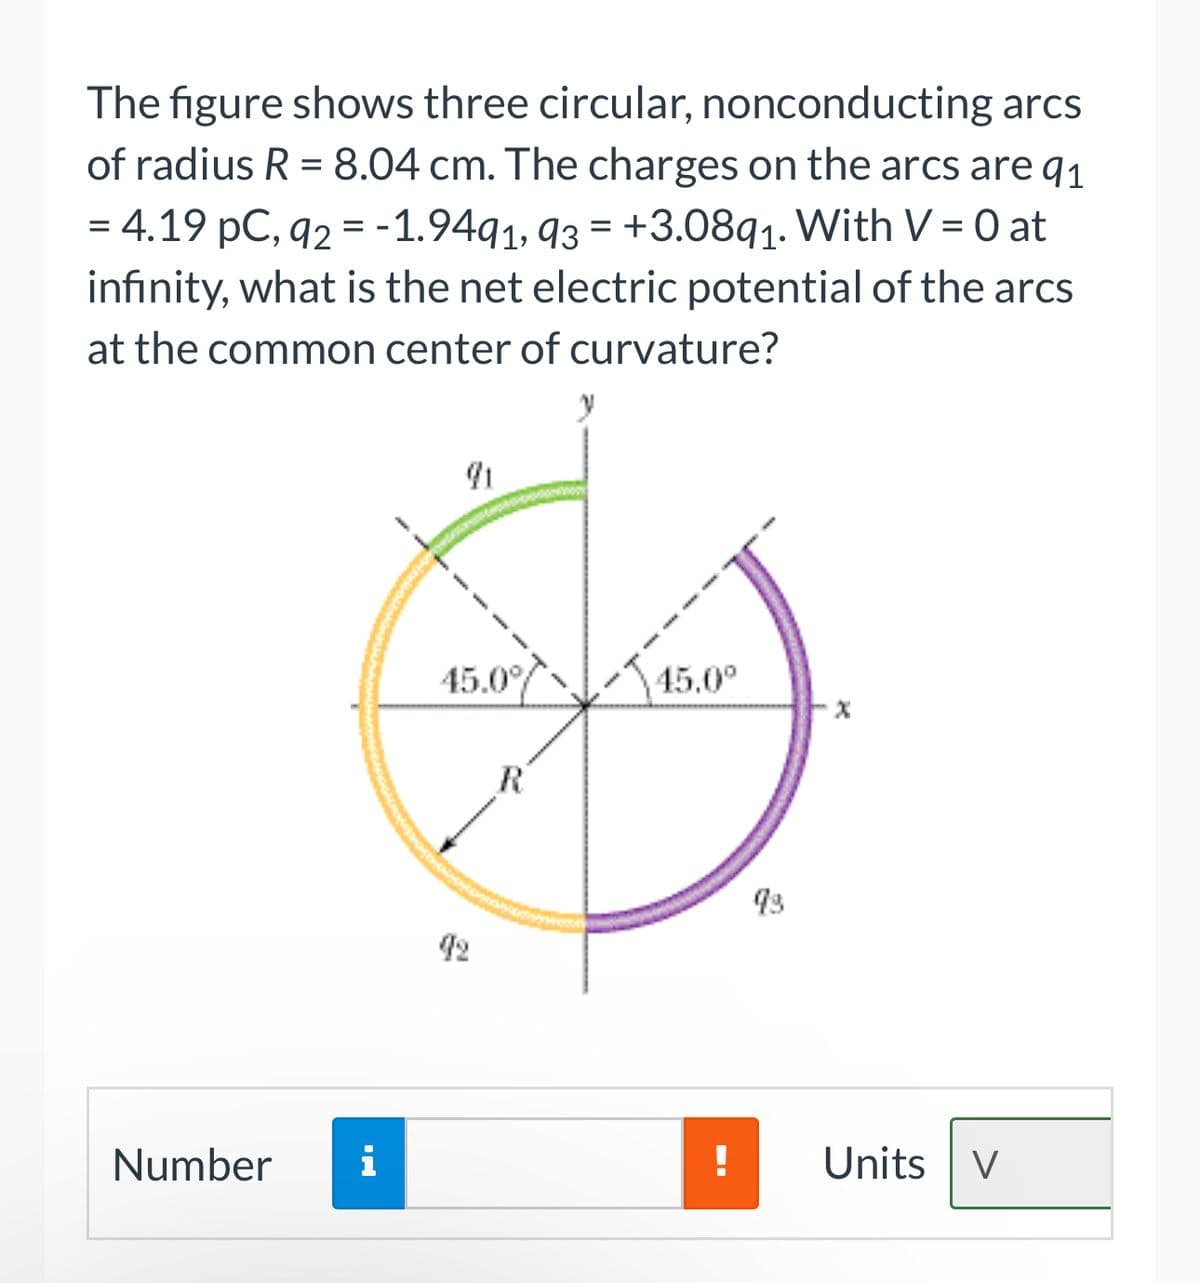 The figure shows three circular, nonconducting arcs
of radius R = 8.04 cm. The charges on the arcs are q1
= 4.19 pC, 92 = -1.9491, 93 +3.0891. With V = 0 at
infinity, what is the net electric potential of the arcs
at the common center of curvature?
=
Number
i
45.0°
R
45.0⁰
!
93
X
Units V